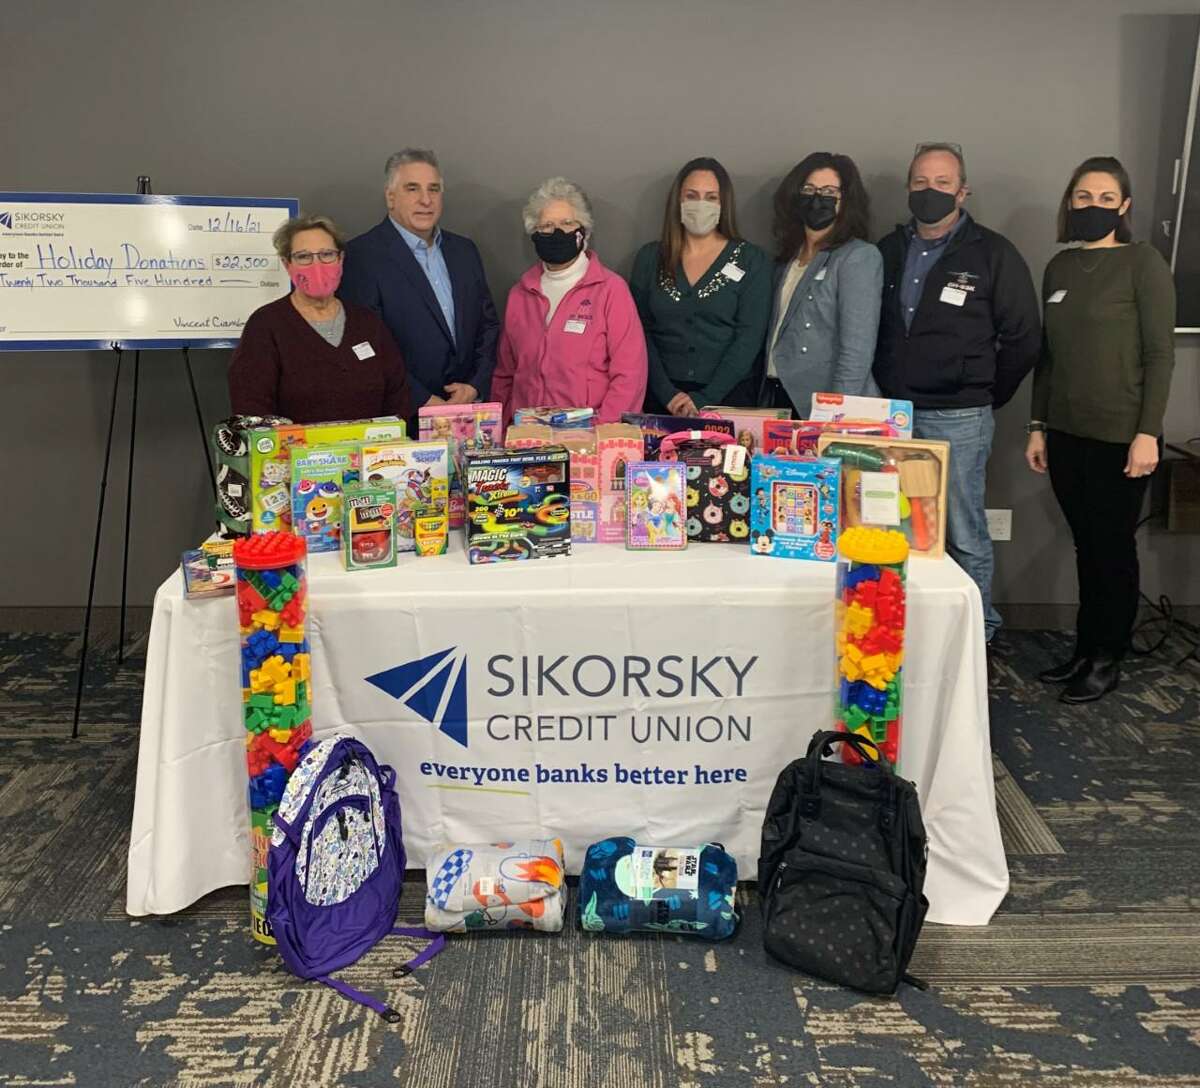 In addition to hosting toy drives in all of its branch locations, the Sikorsky Credit Union has recently donated $22,500 to local non-profit organizations to help brighten the current holiday season. Over 200 toys were collected during the toy drives for children, and were donated to the Sterling House in Stratford, the Community Action Agency of Western Connecticut, the Boys and Girls Club of Milford, the McGivney Center in Bridgeport, the Danbury Youth Services department, and the Boys and Girls Club of the Lower Naugatuck Valley. In addition to toys, each of the non-profit organizations, and Impact Trumbull, the Center for Family Justice in Bridgeport, and Seymour Pink, received a $2,500 holiday donation from Sikorsky Credit Union. A photo from the happenings, is shown.